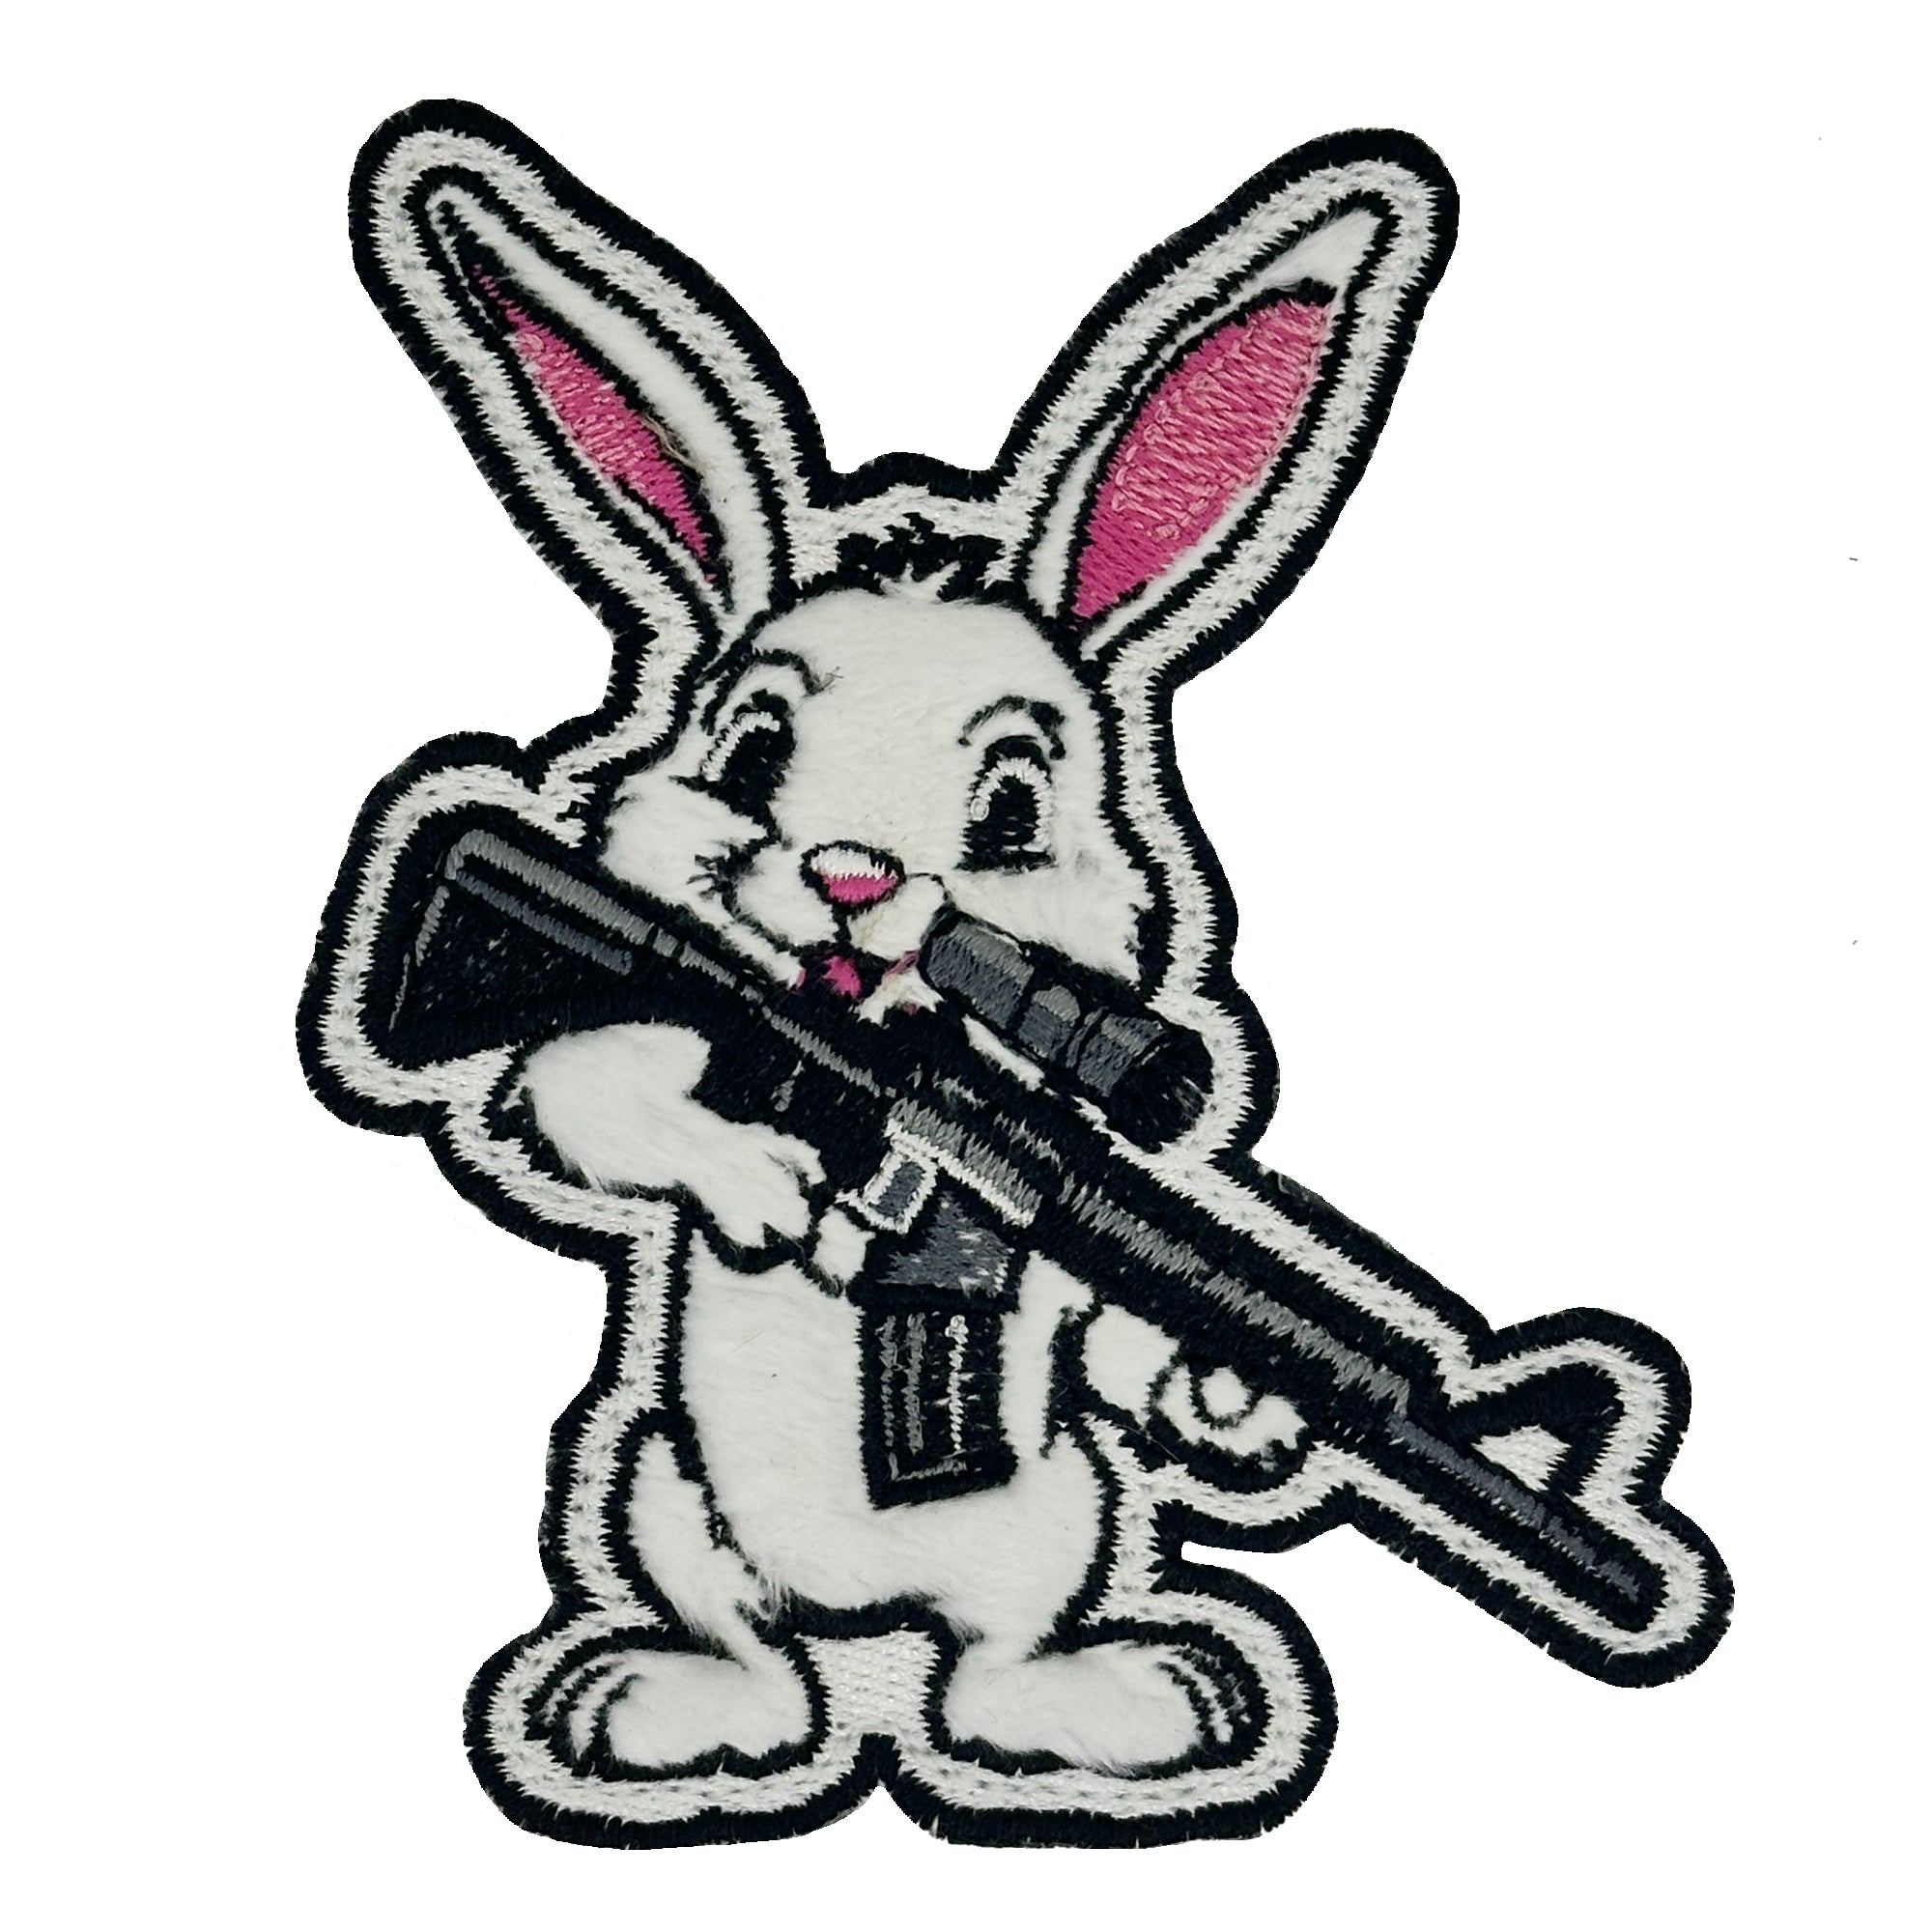 Tactical AR15 Battle Bunny - Fuzzy 4" Patch - Bad Bunny Collection